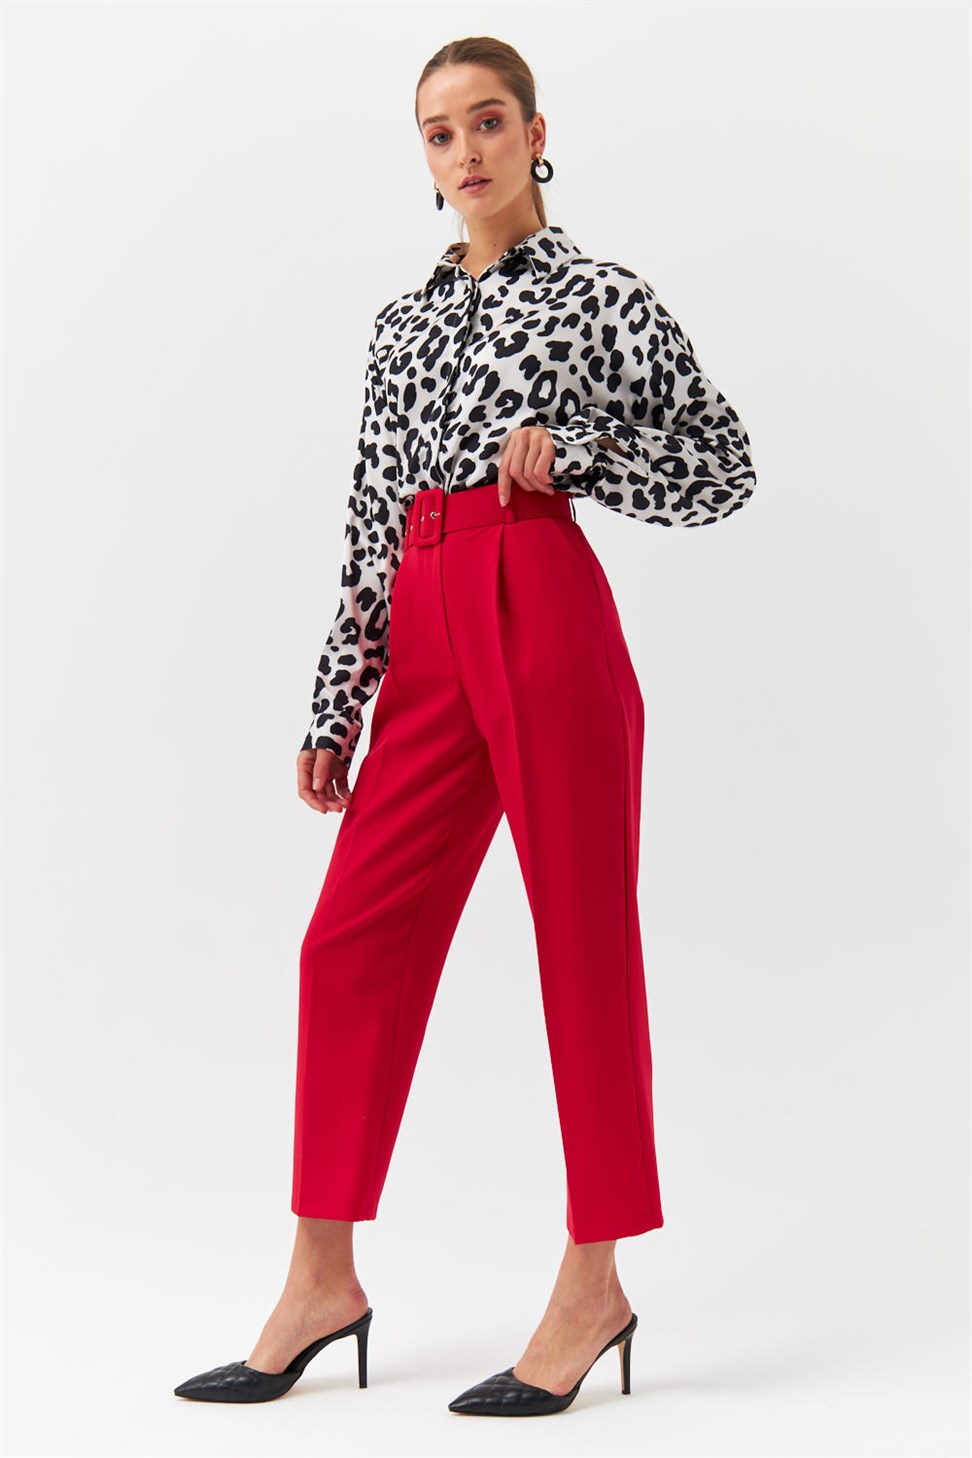 Modest Pile Detailed Arched Fabric Red Pants